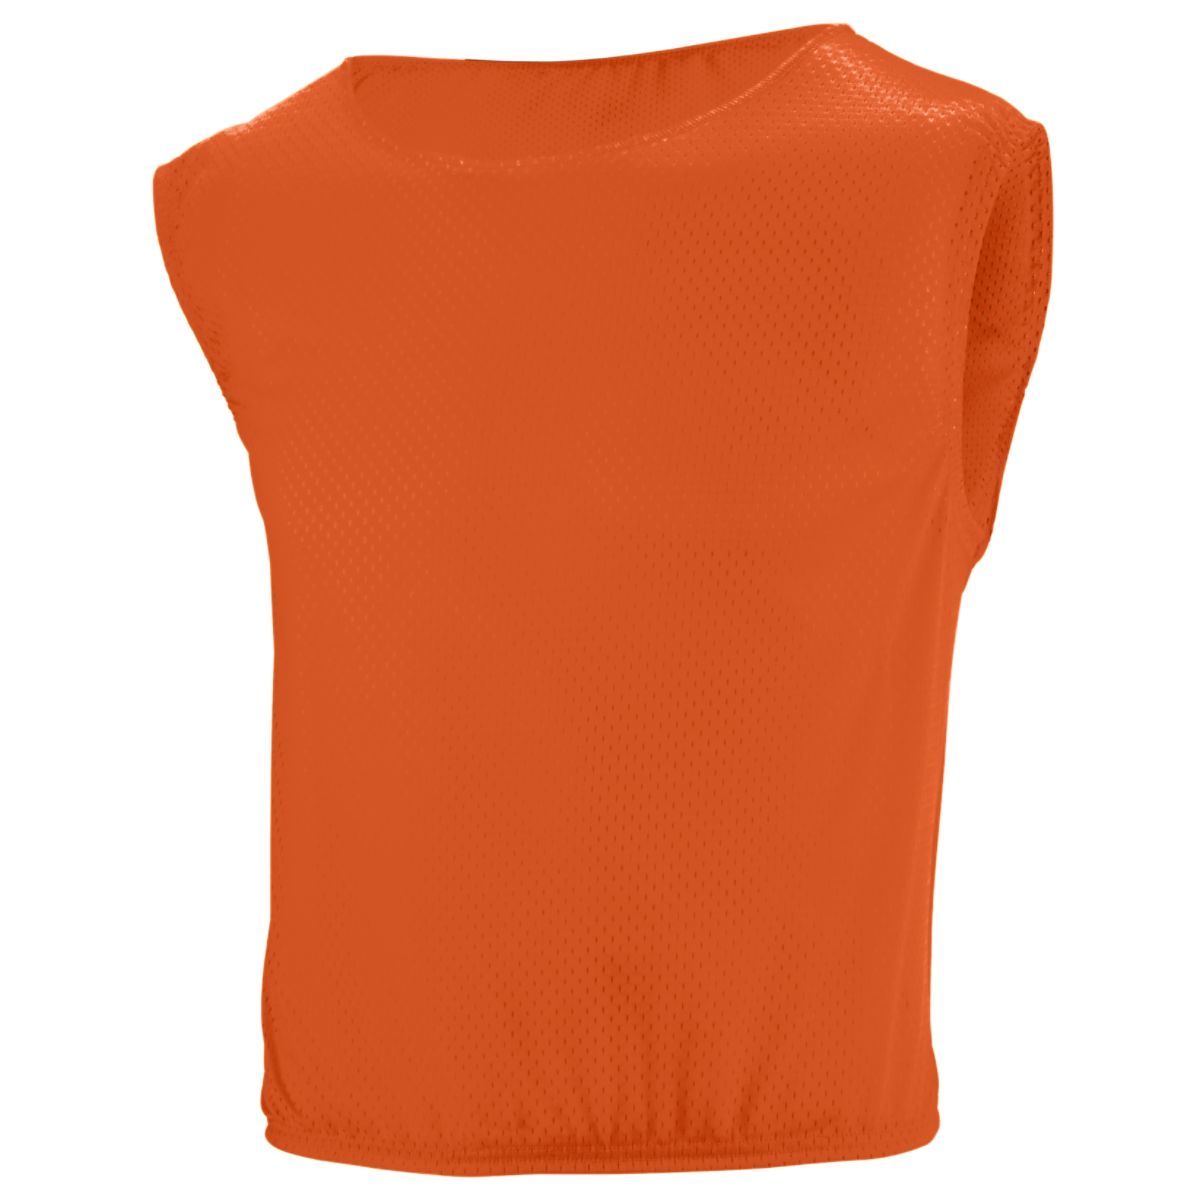 Augusta Sportswear Scrimmage Vest in Orange  -Part of the Adult, Augusta-Products, Football, Outerwear, All-Sports, All-Sports-1 product lines at KanaleyCreations.com